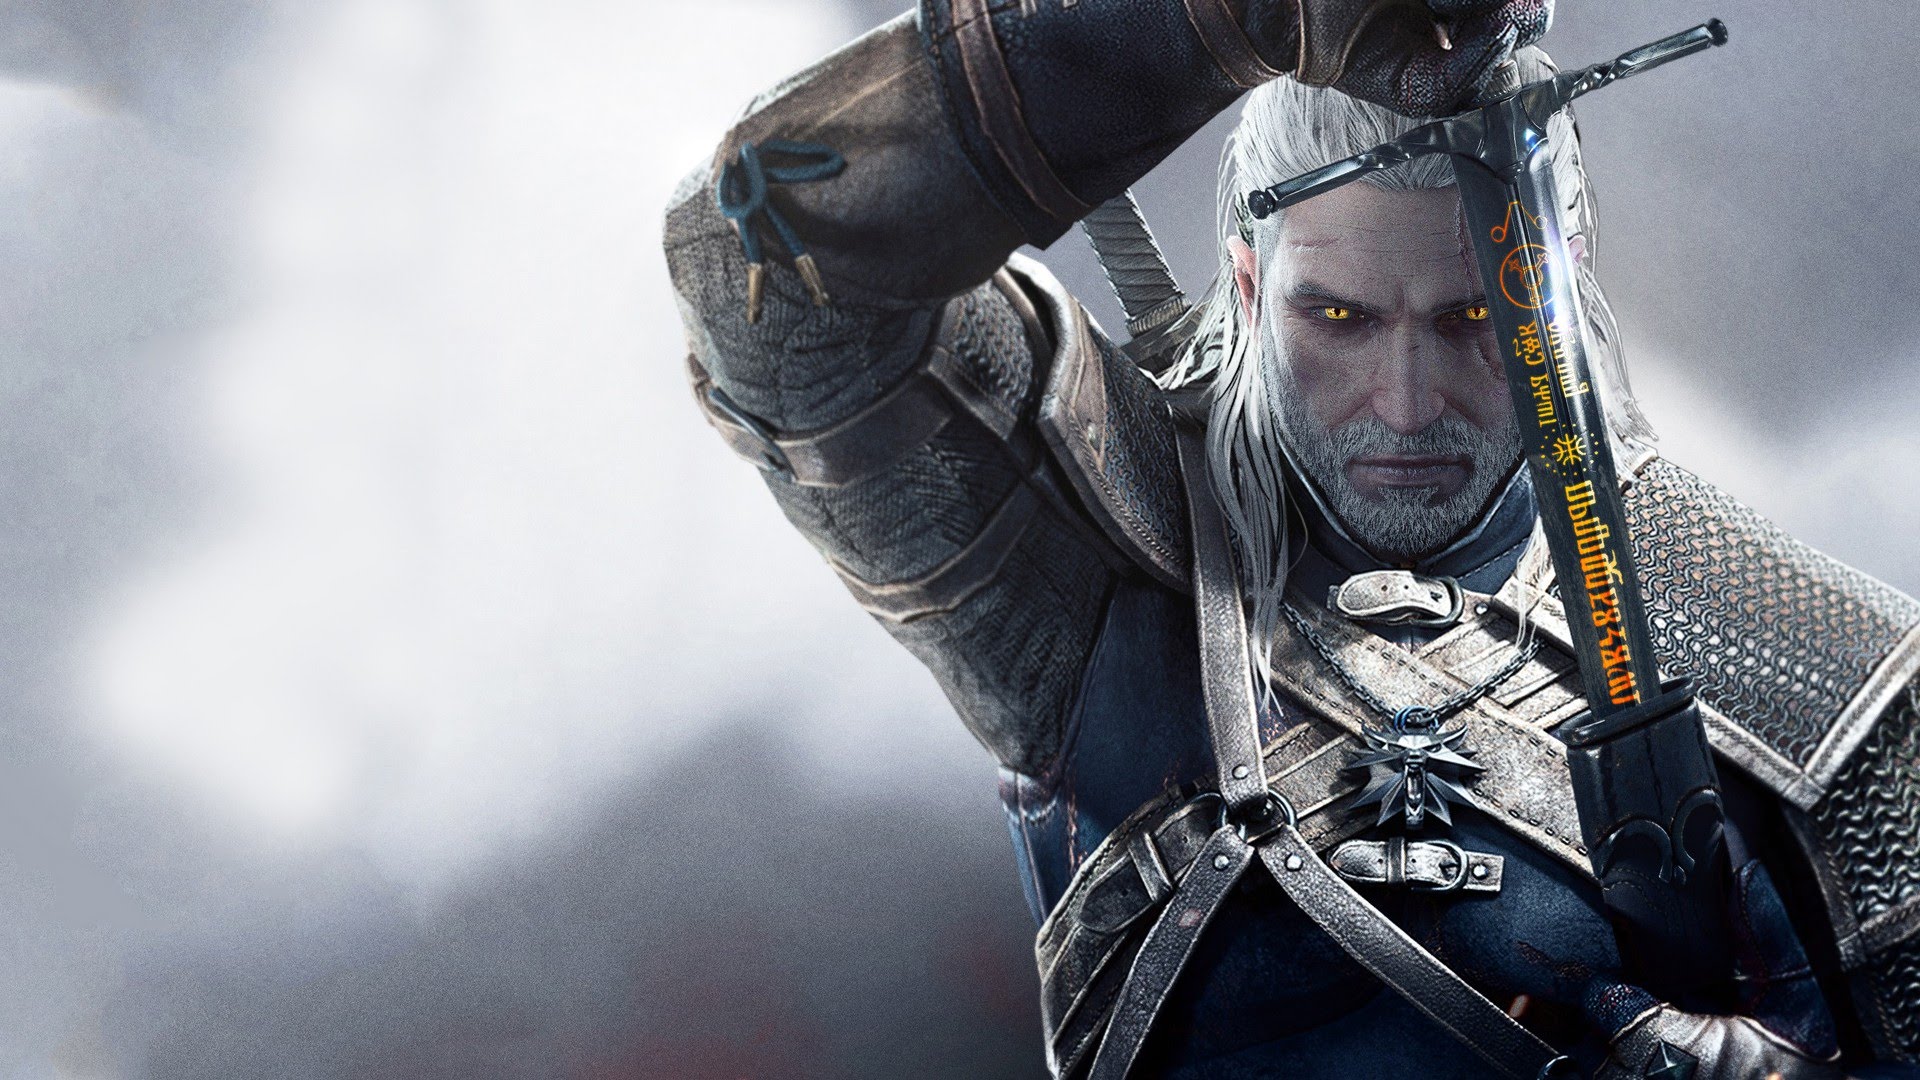 Netflix To Produce ‘The Witcher’ Series